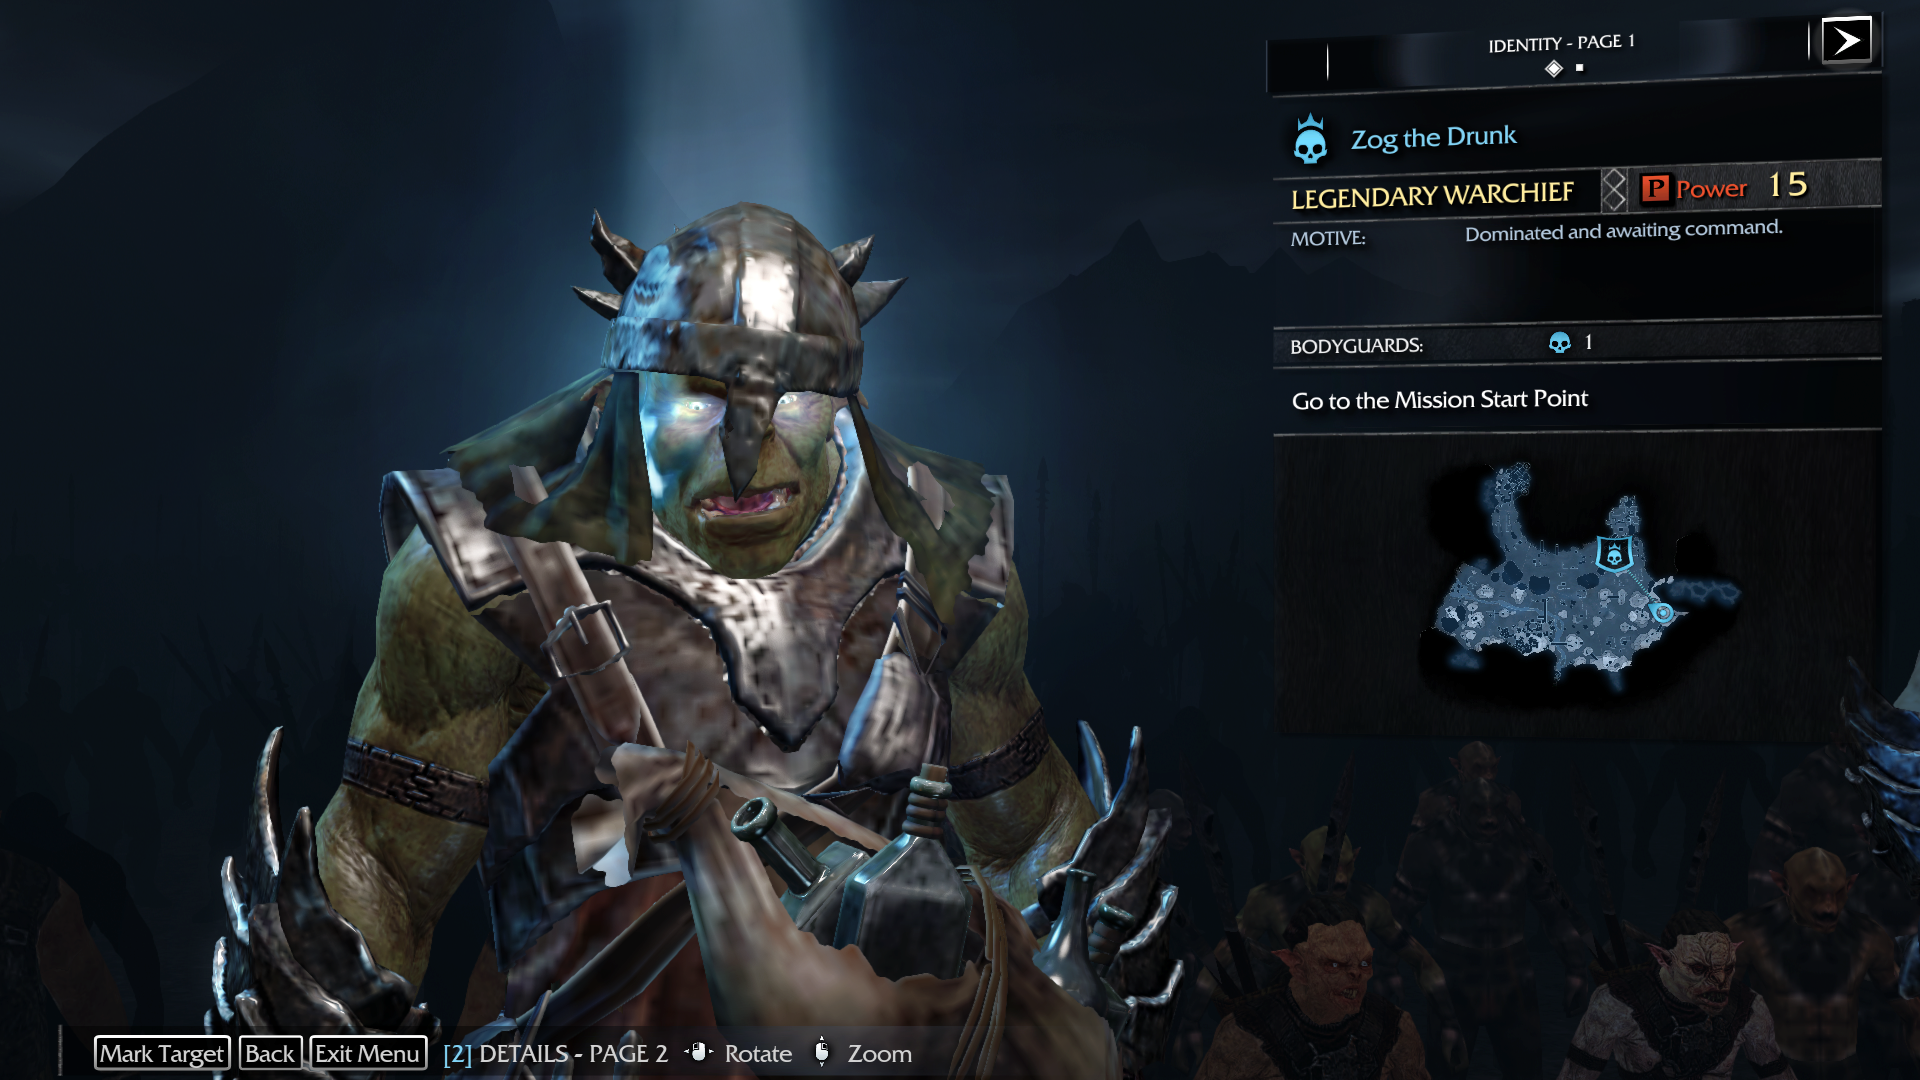 Middle-earth: Shadow of Mordor was updated so completionists can